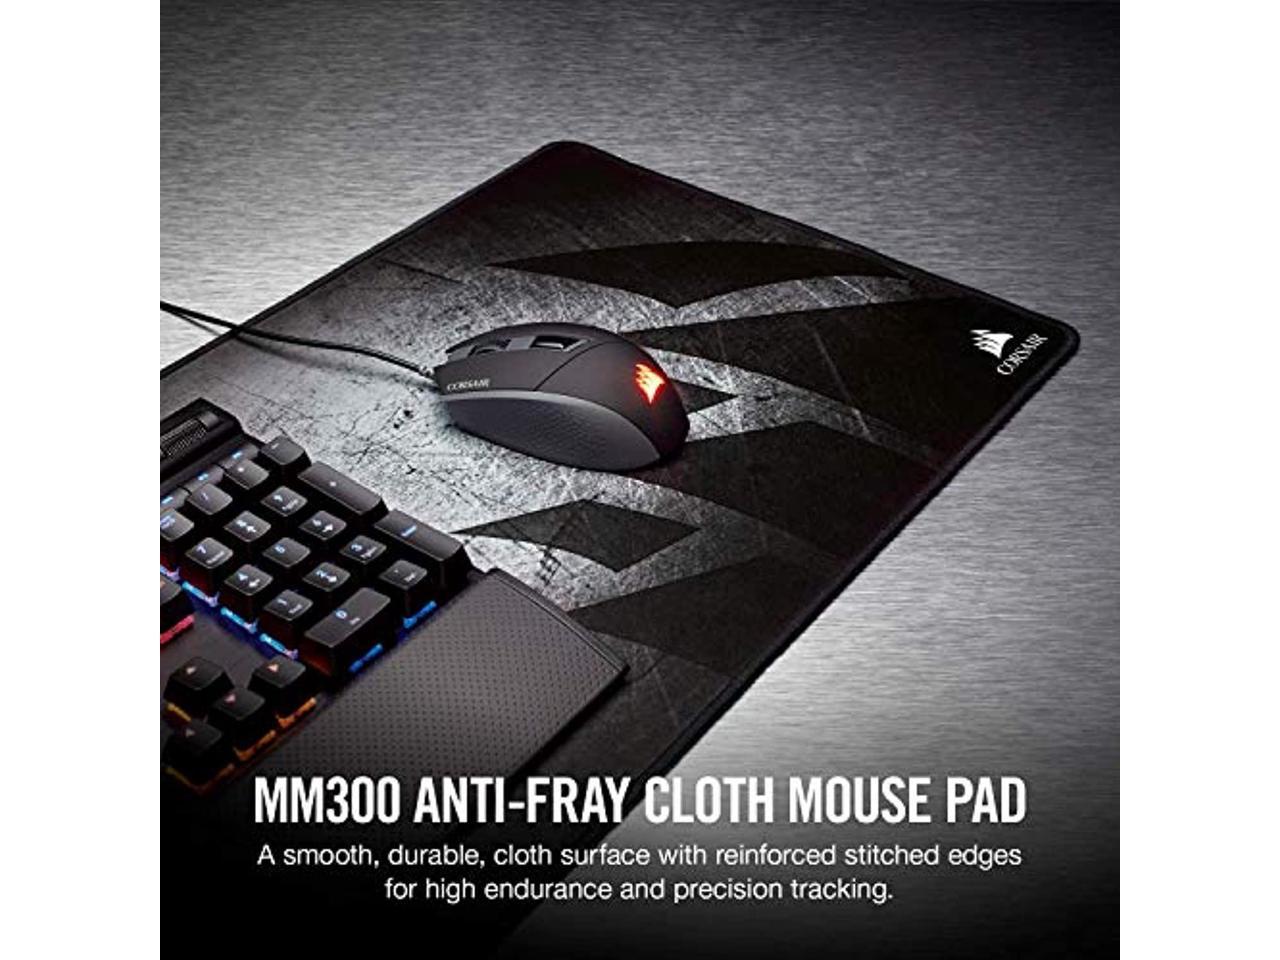 Backlit Red LED Extended Cherry MX Speed and Corsair Gaming MM300 Anti-Fray Cloth Gaming Mouse Pad Corsair Gaming K70 RAPIDFIRE Mechanical Keyboard 